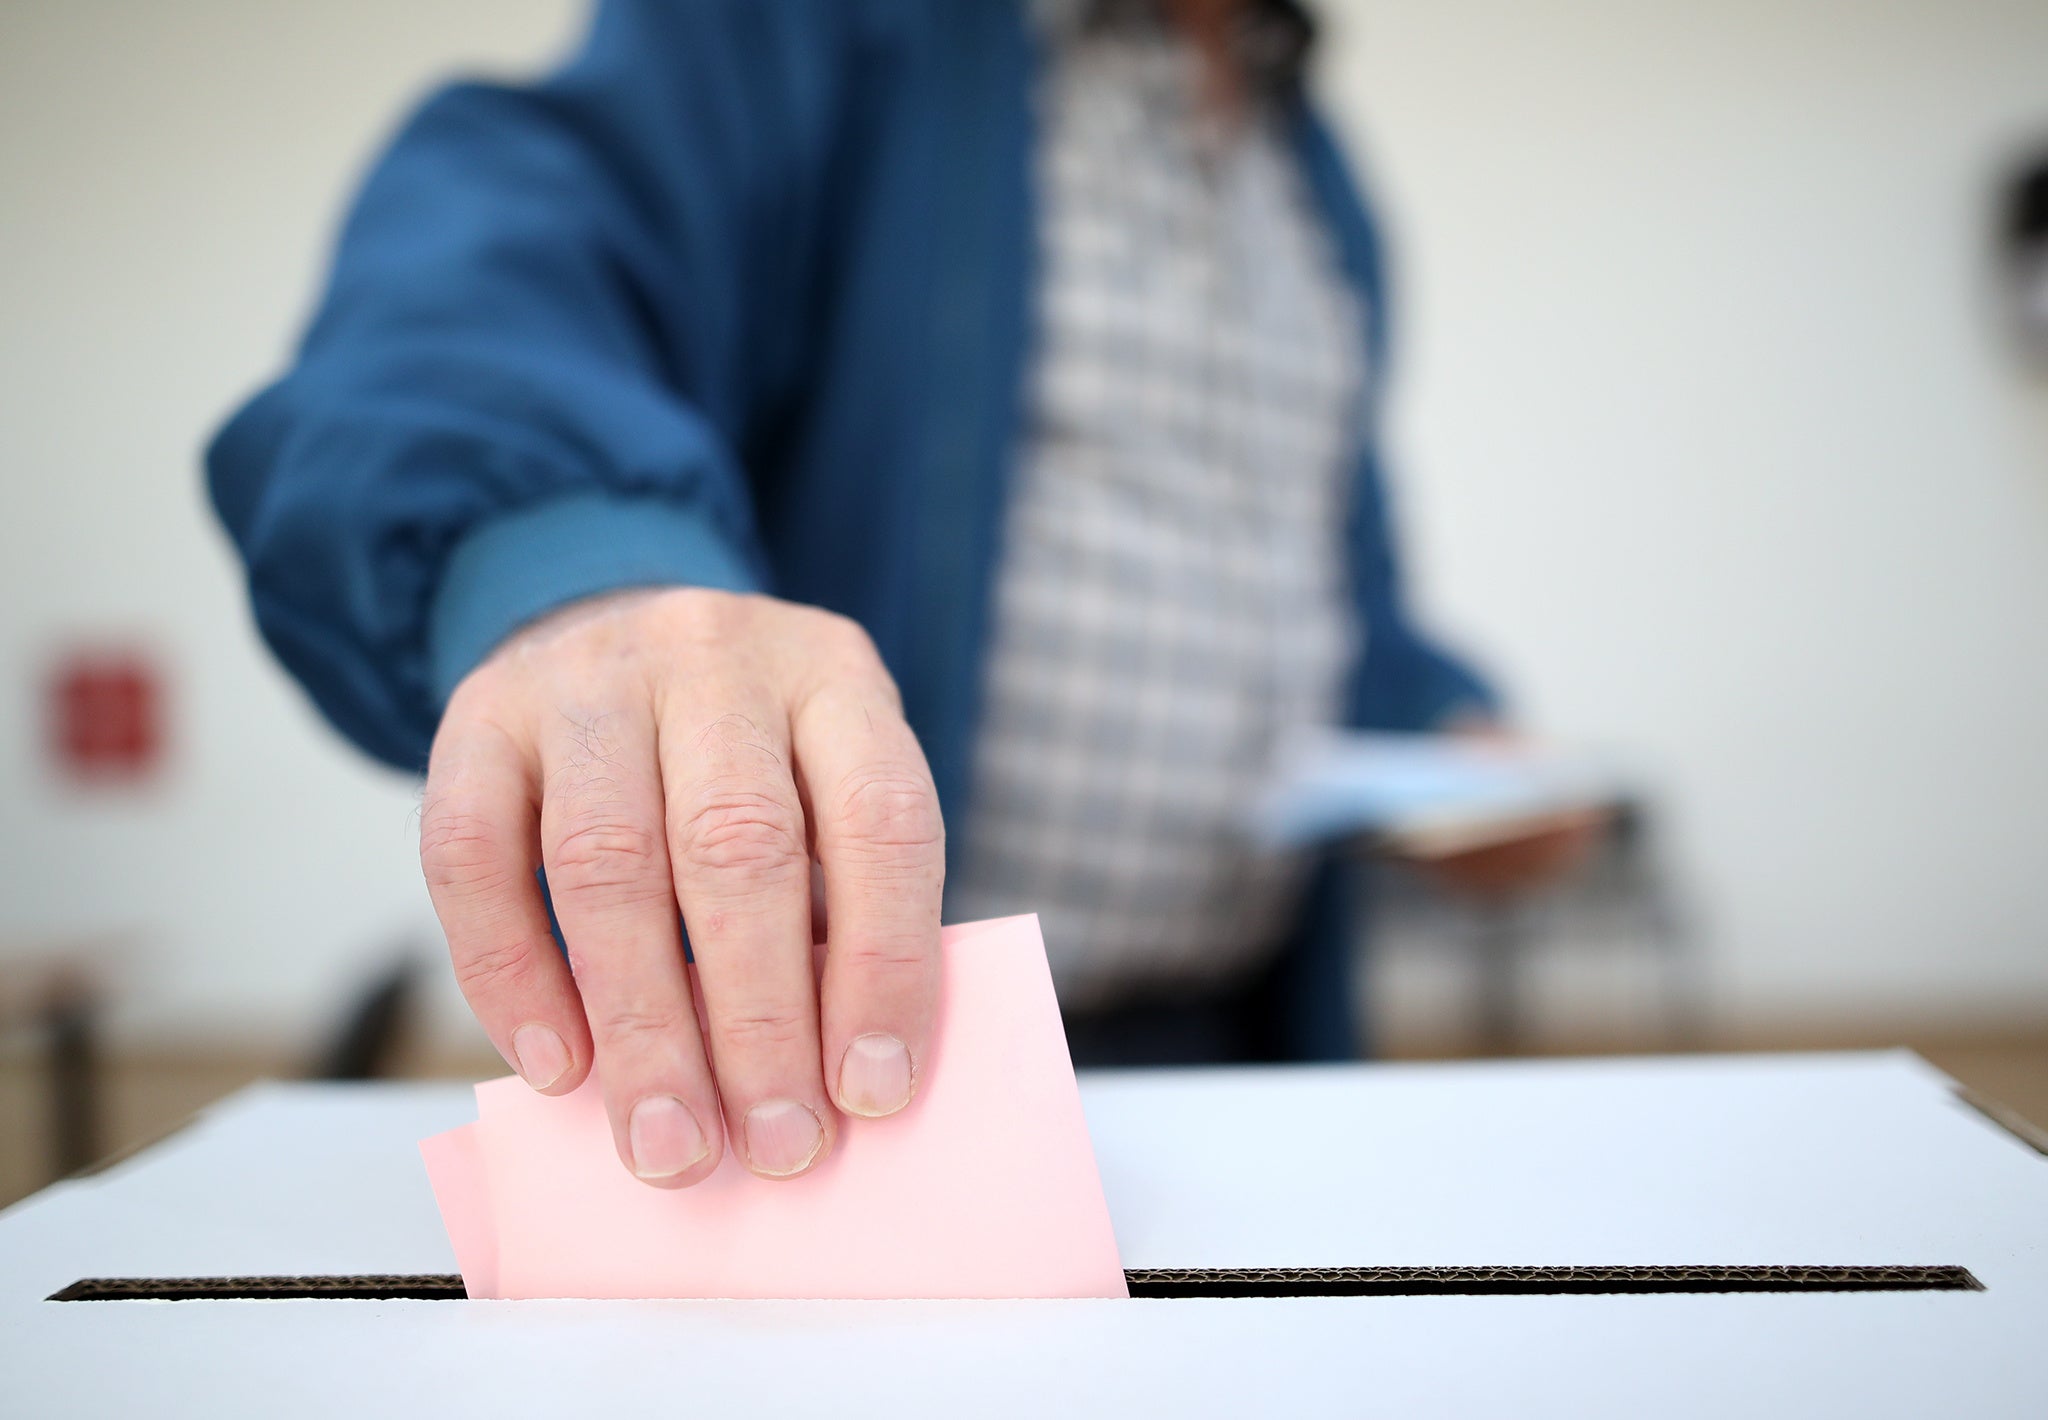 Man casts his ballot as he votes for the local elections at a polling station. Focus on hand.